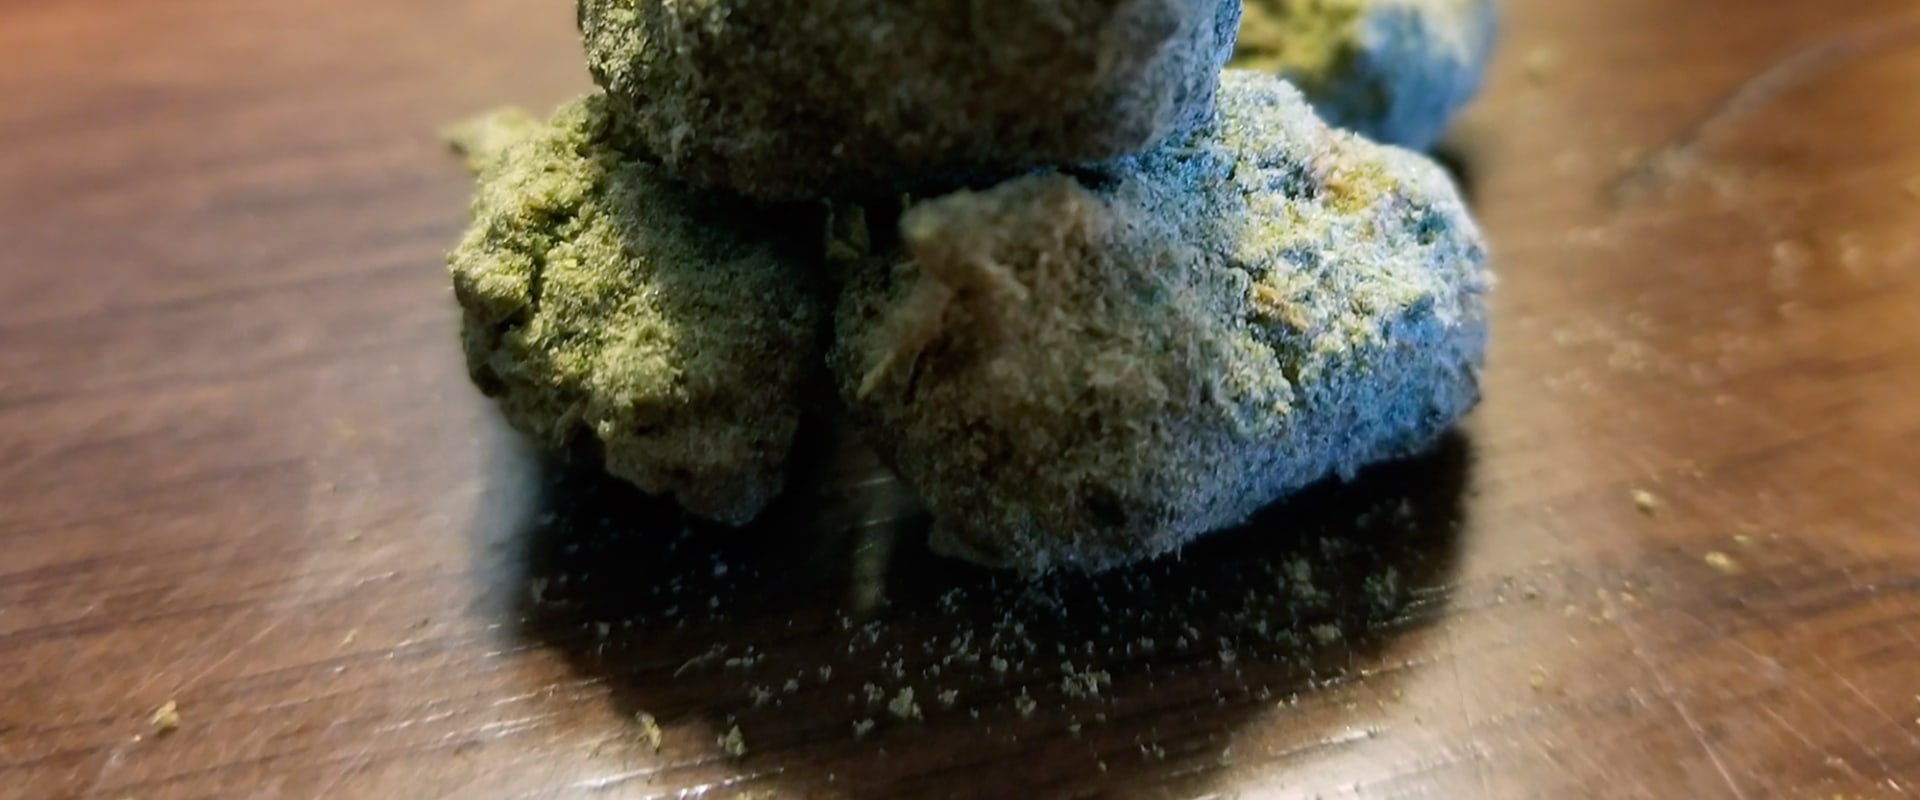 What are some tips for getting the most out of my moon rocks experience?